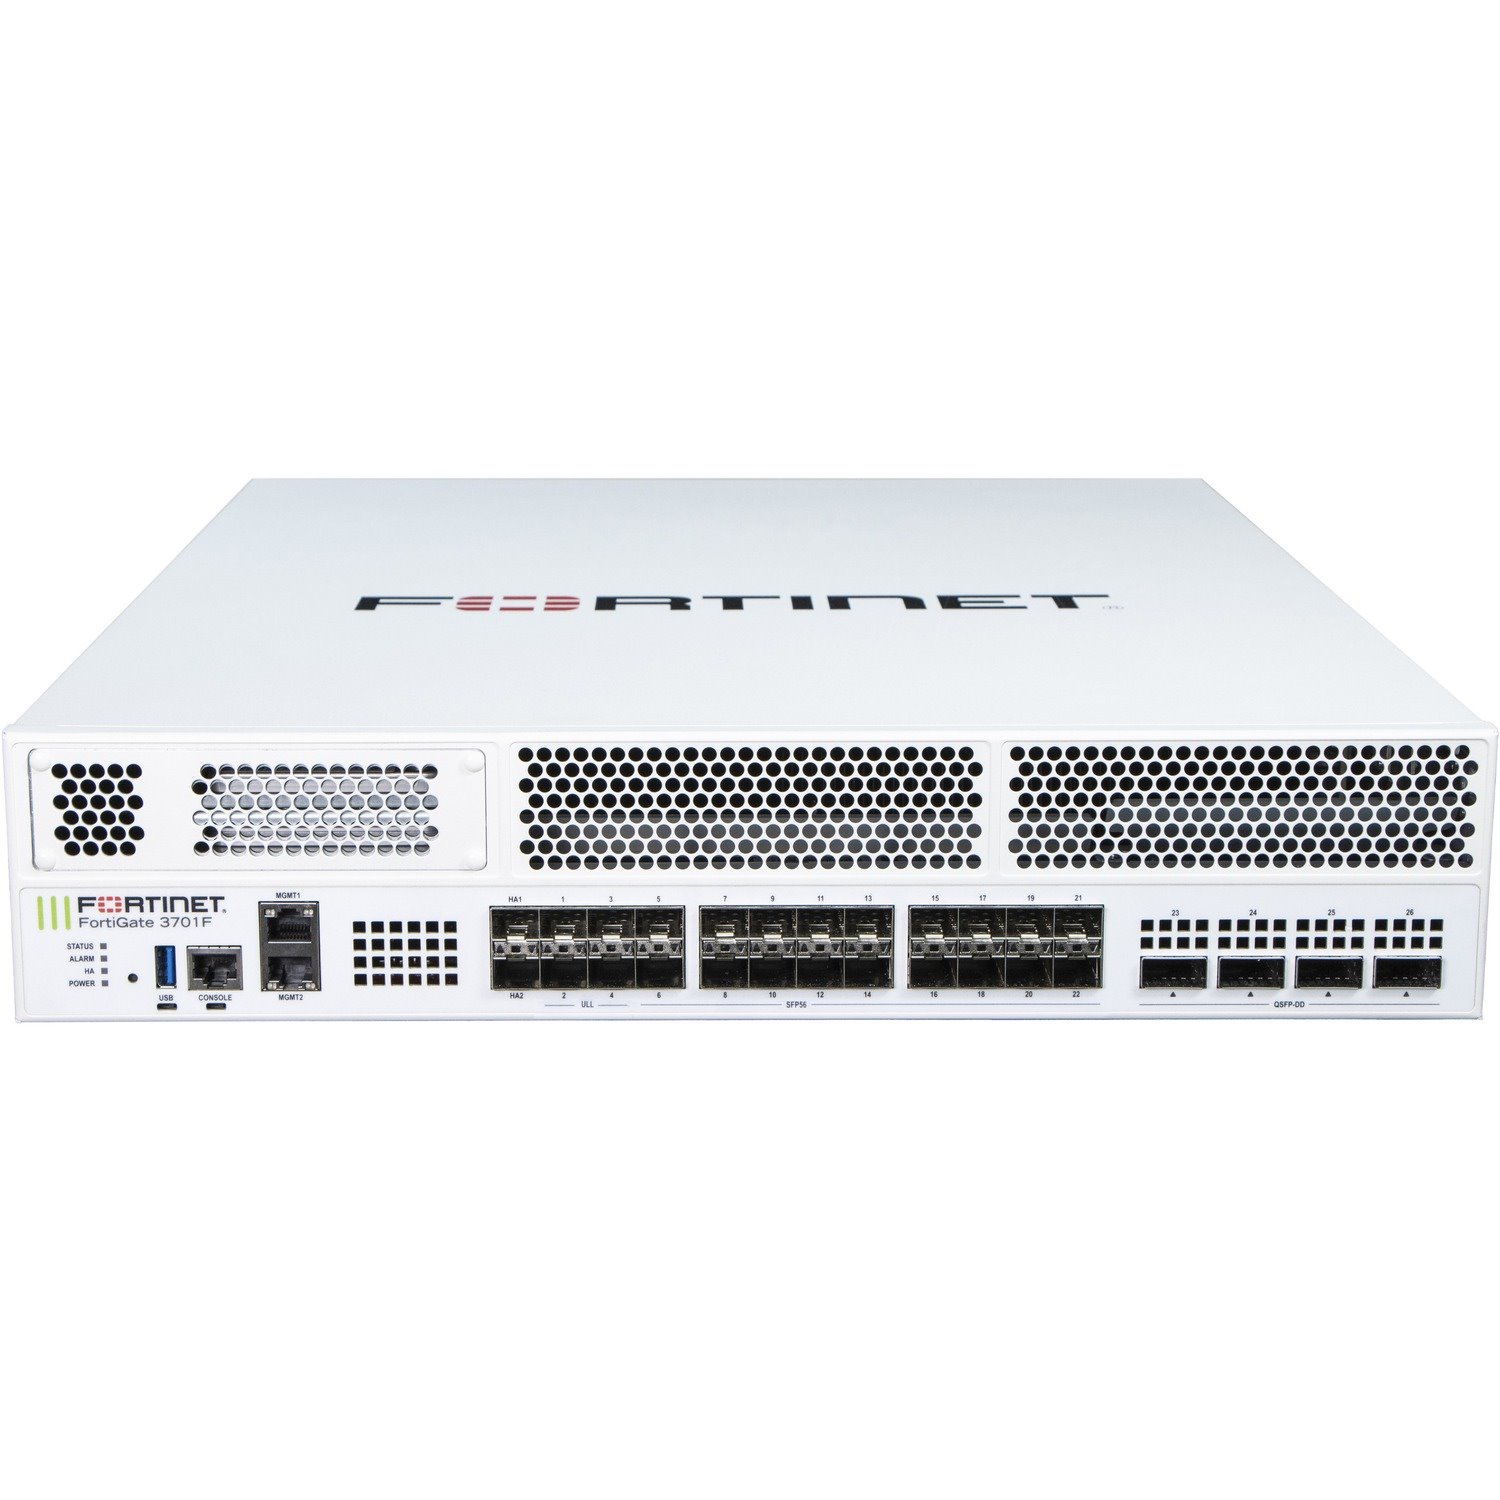 Fortinet FortiGate FG-3700F Network Security/Firewall Appliance